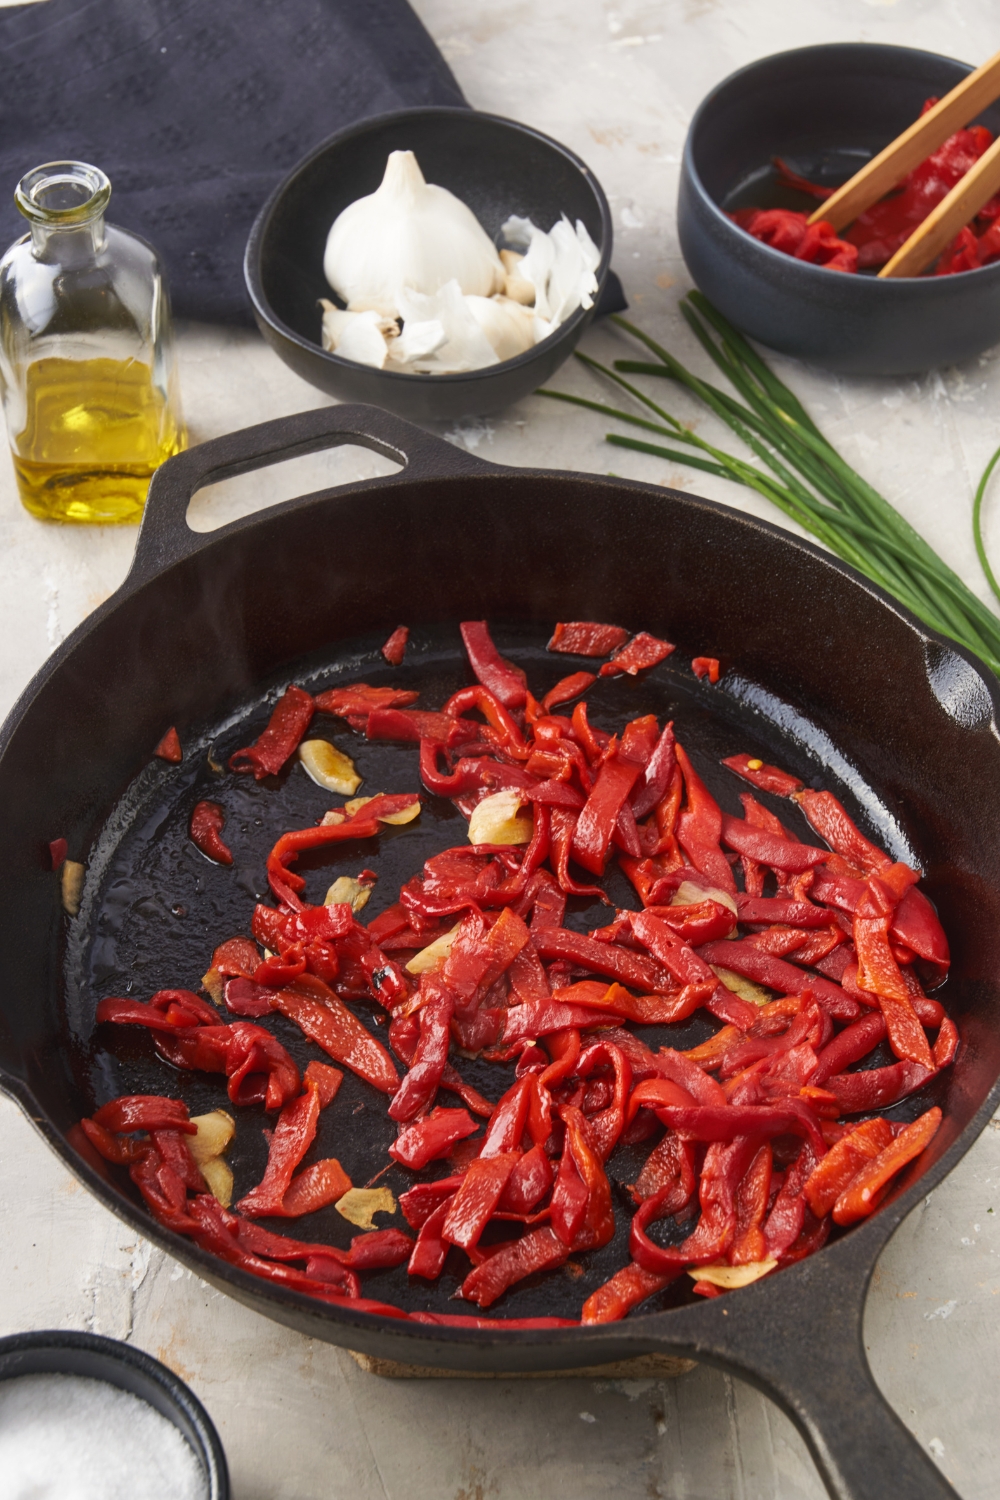 A cast iron skillet with sautéed red bell peppers and garlic in it.